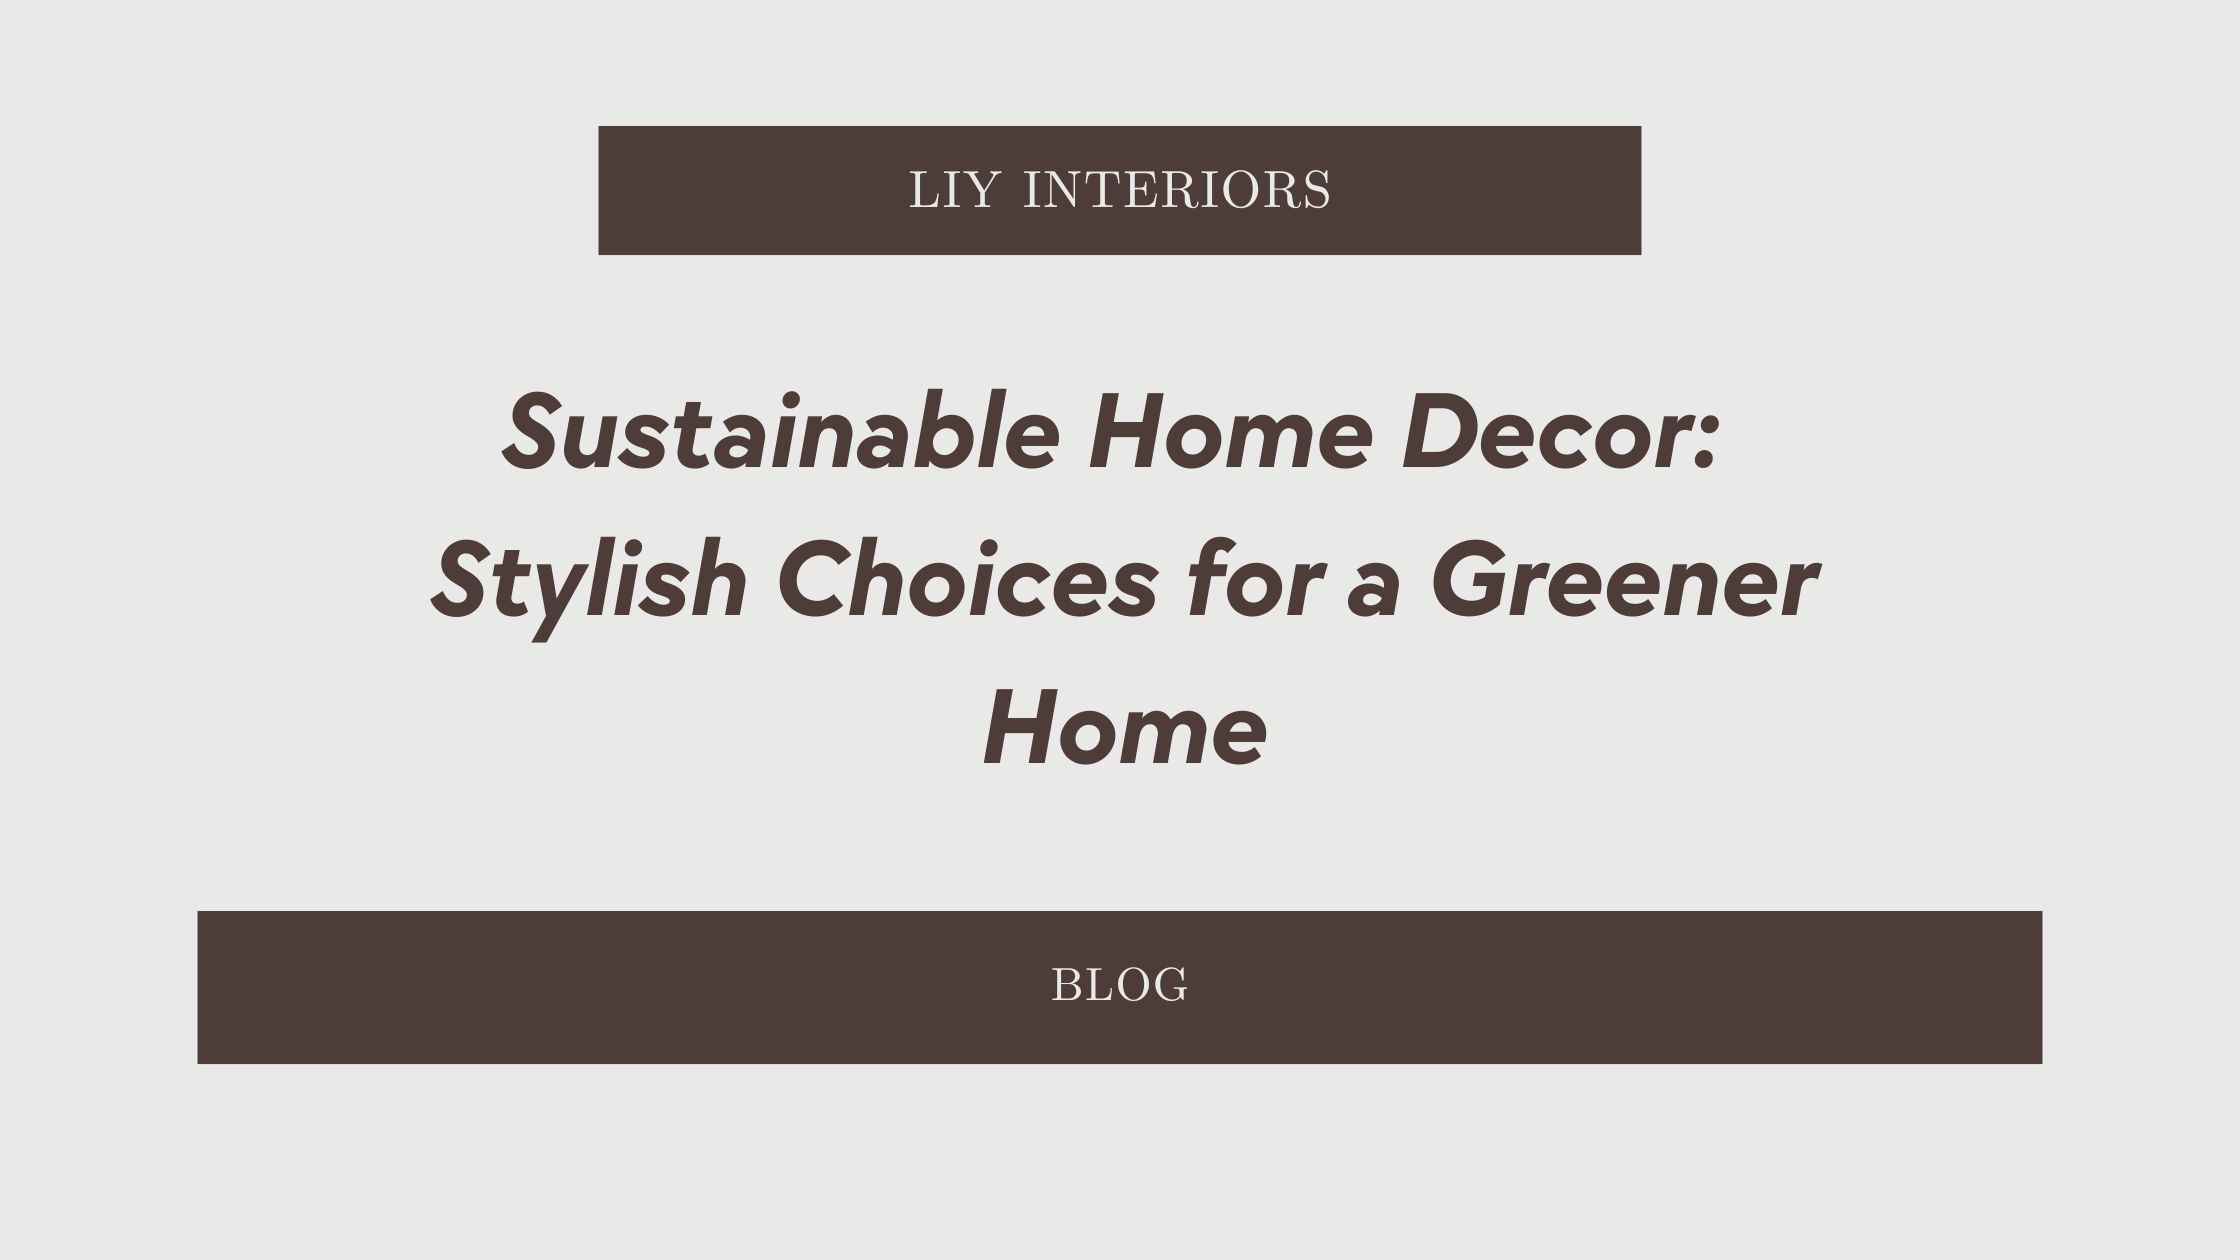 Sustainable Home Decor: Stylish Choices for a Greener Home